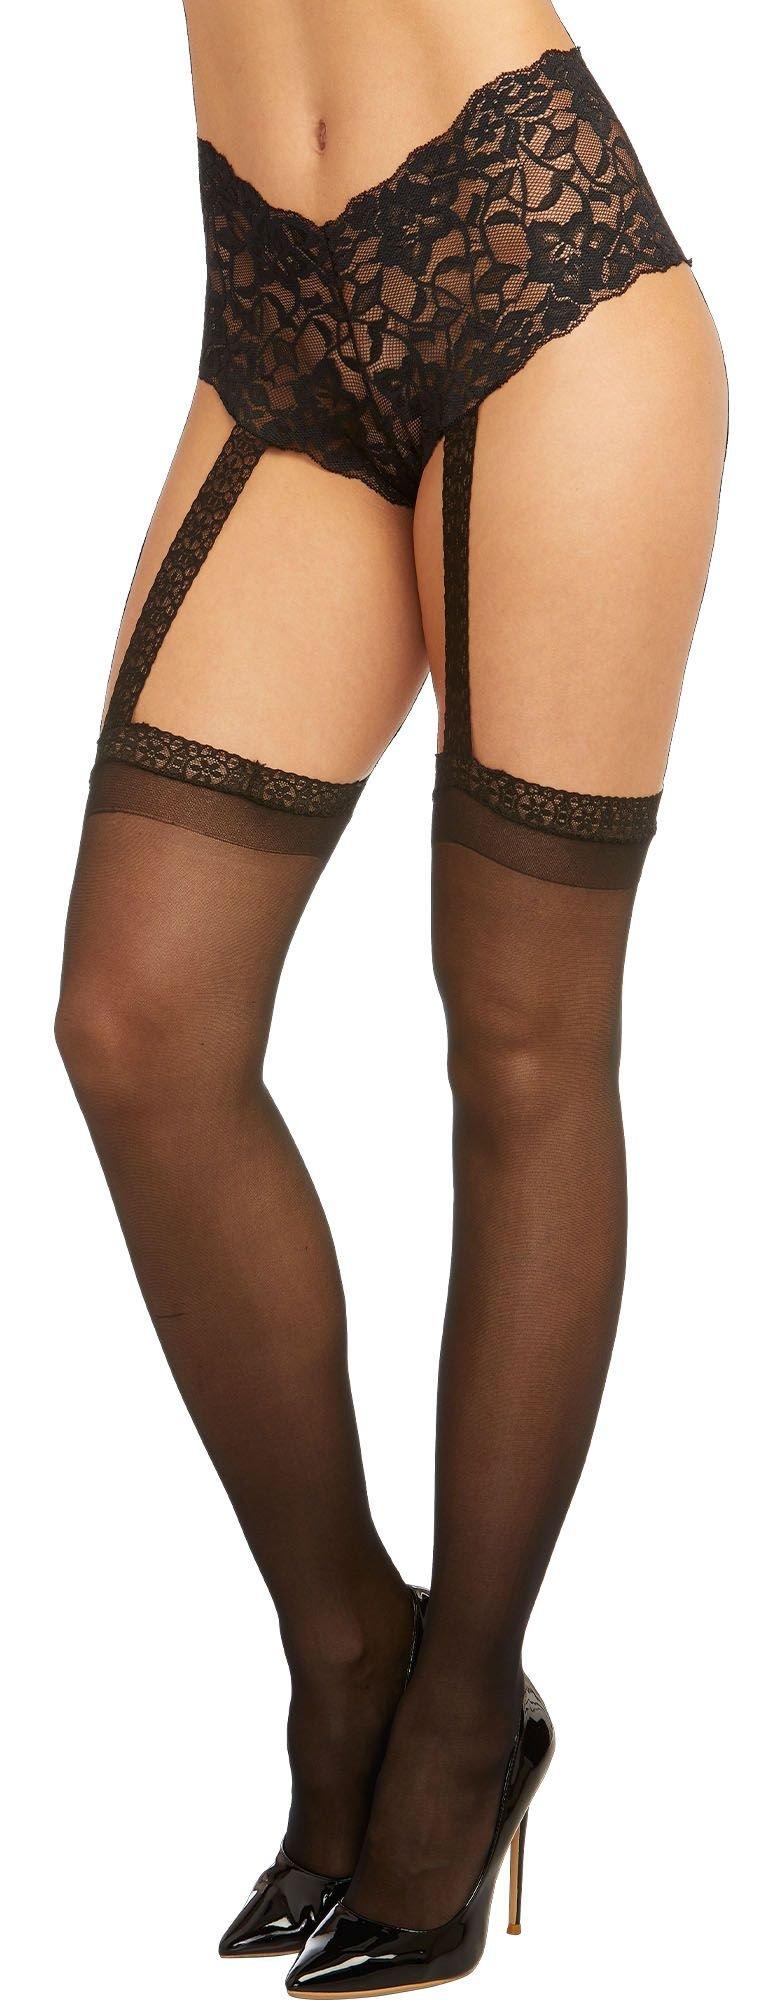 Women Sheer Net Lace Tights Top Garter Belt Thigh Pantyhose Over Knee  Erotic Hosiery Stay-up Stockings · KoKo Fashion · Online Store Powered by  Storenvy